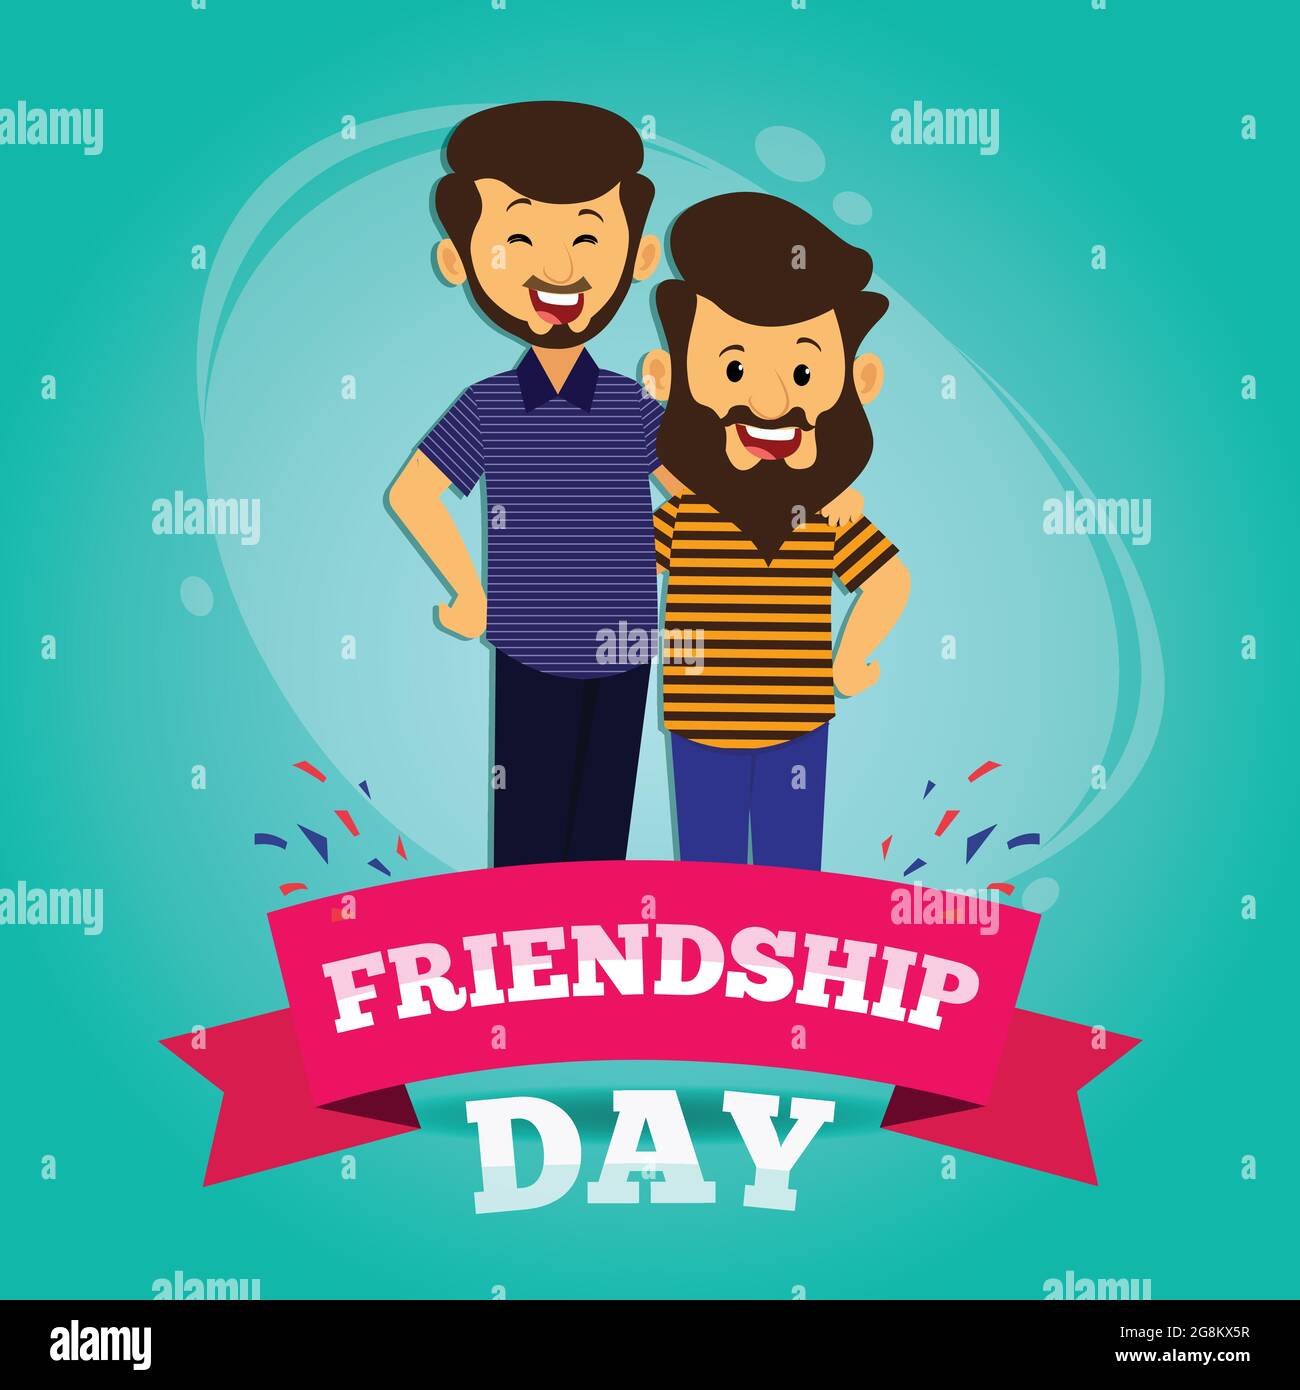 Poster of celebration of Friendship Day. In this poster, two boys meet each other and celebrate Friendship Day. Stock Vector